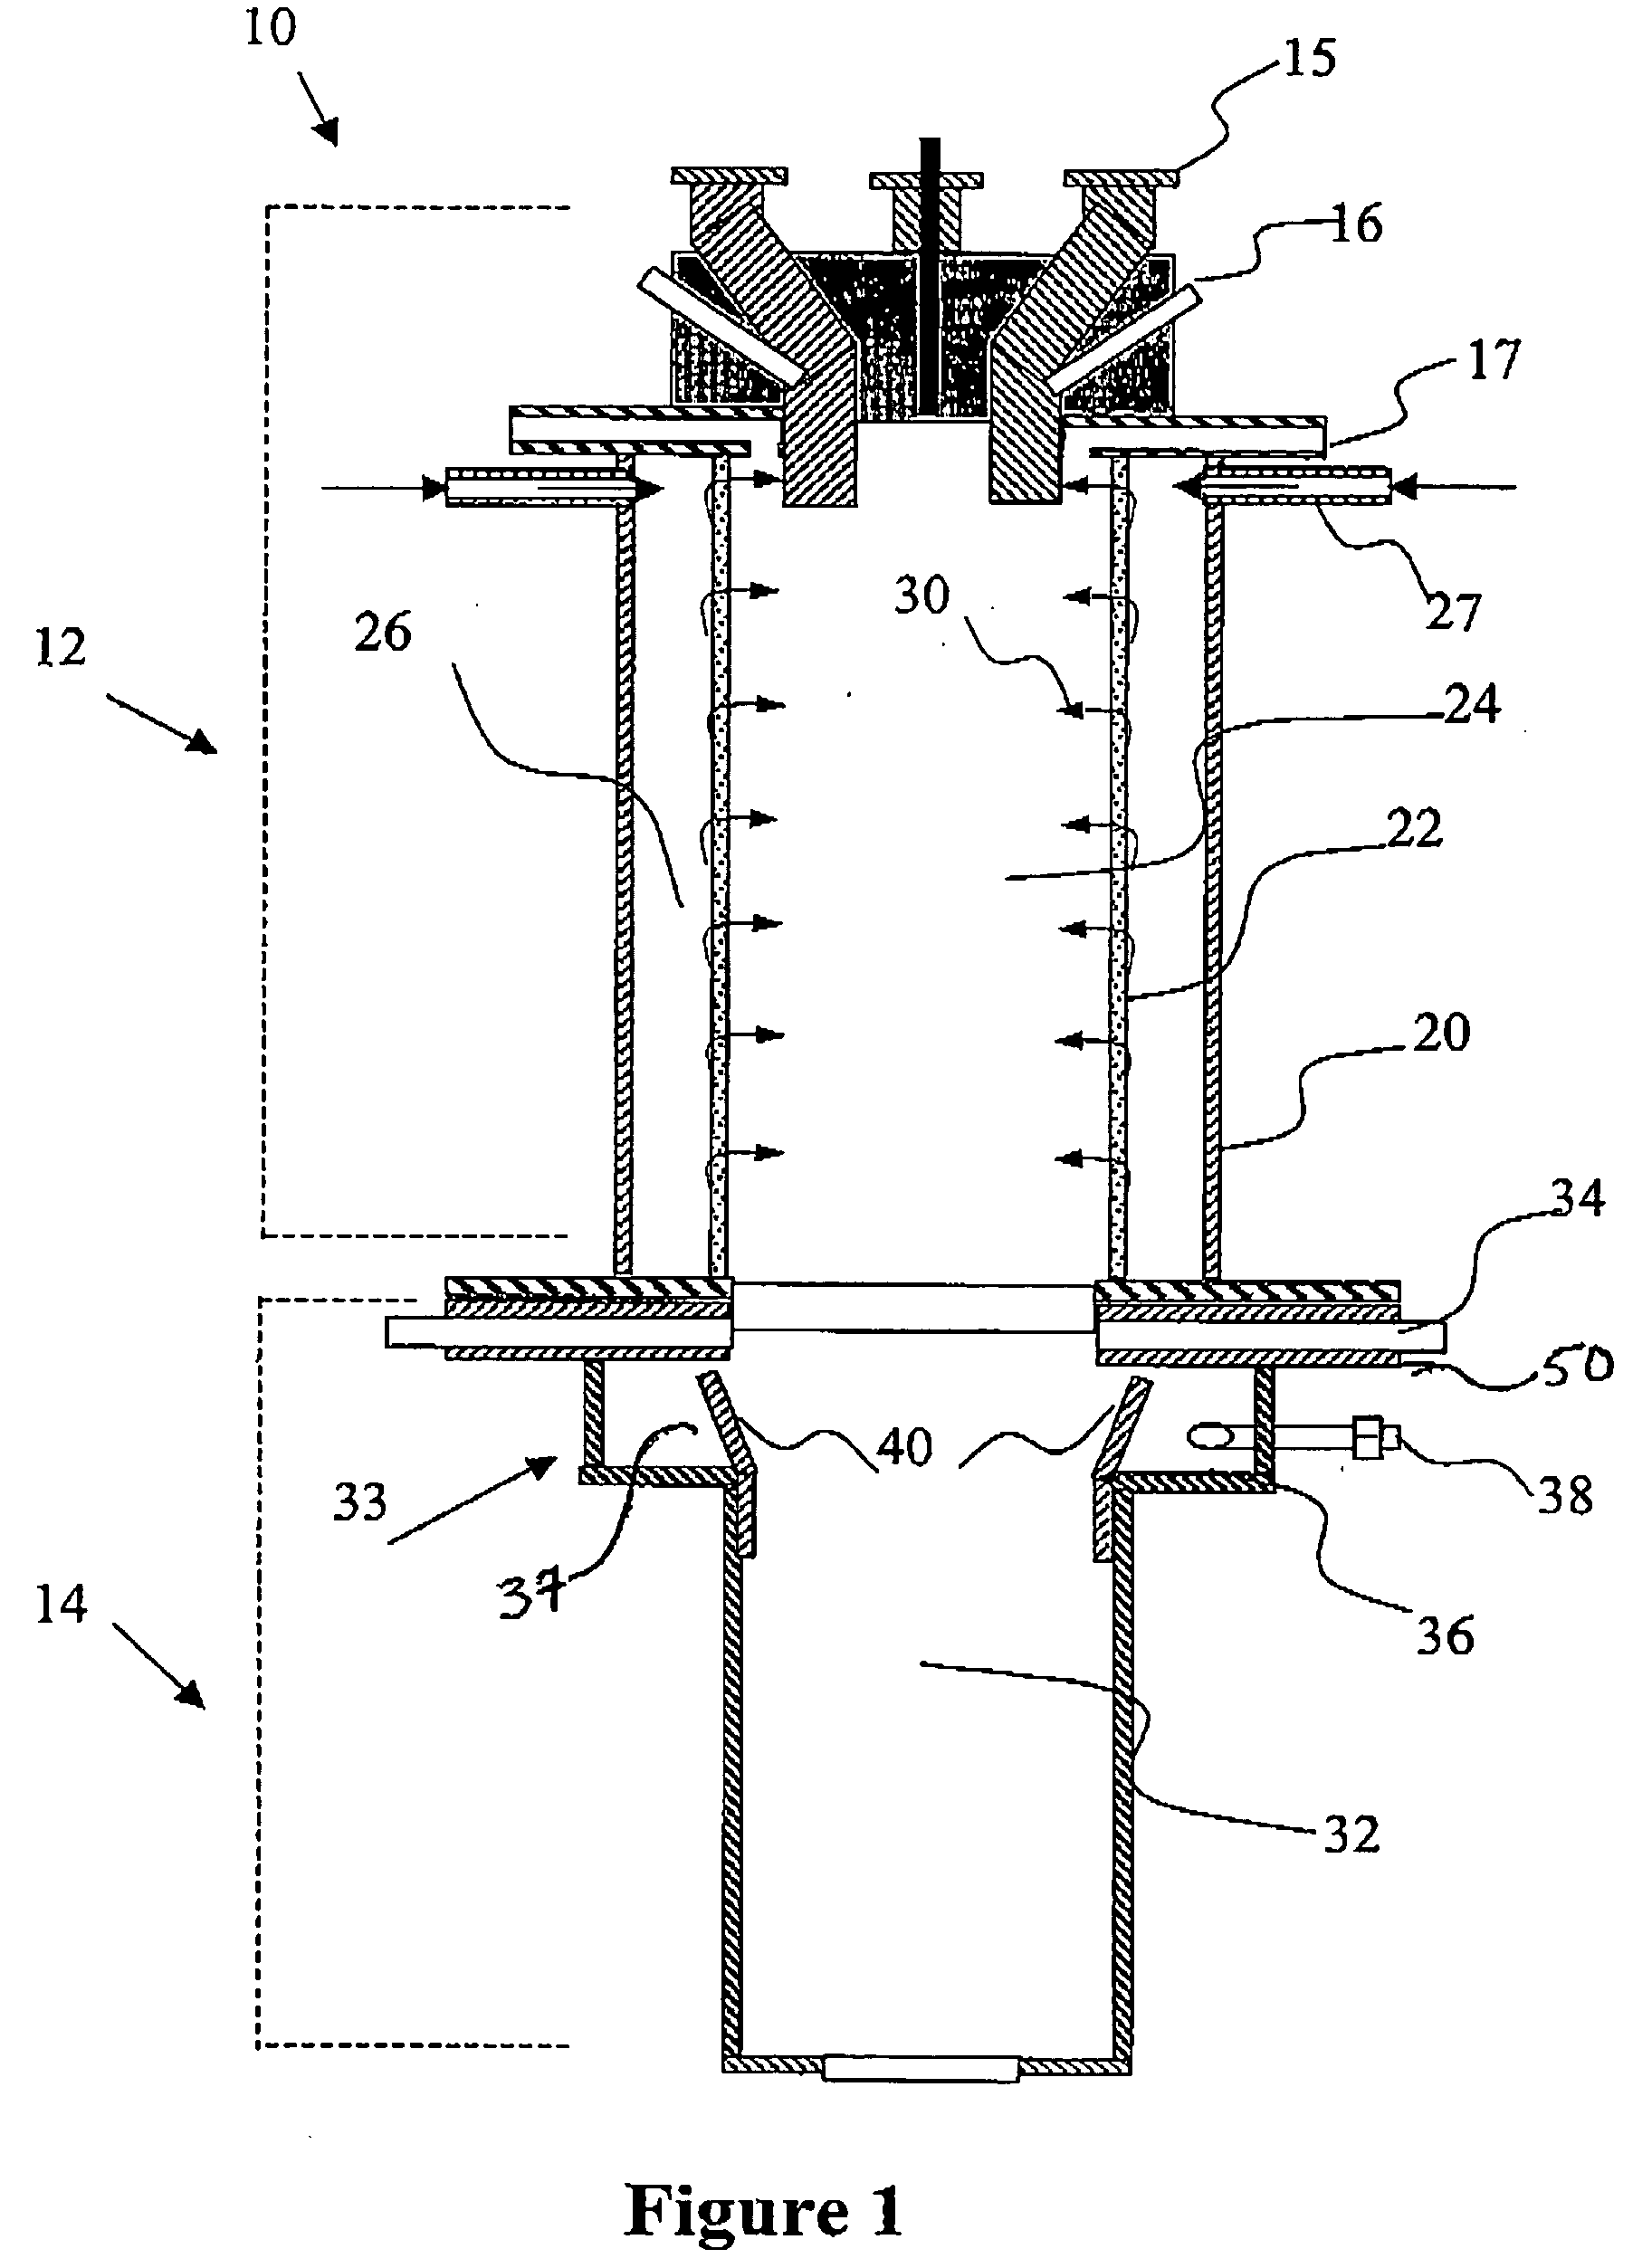 Apparatus and method for controlled combustion of gaseous pollutants